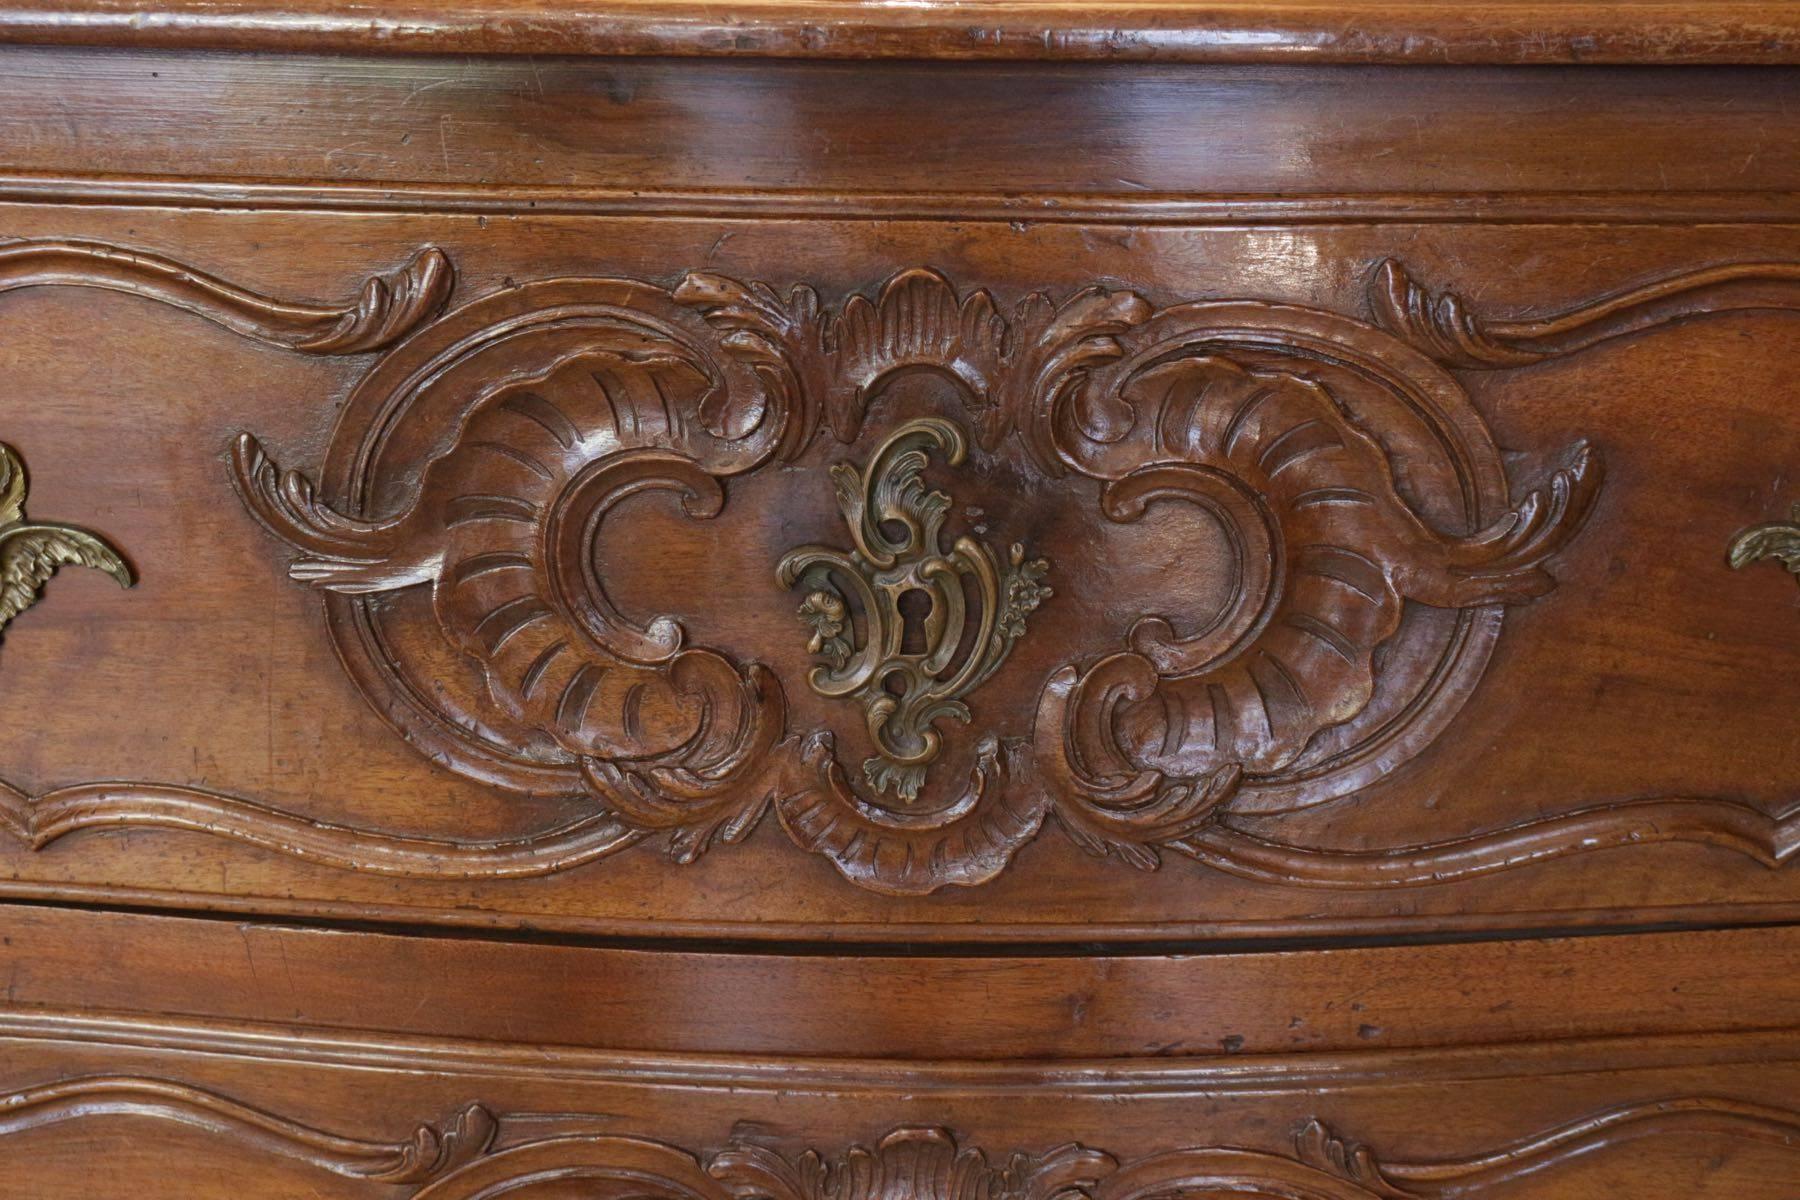 French Provincial French Provençal Avignon 18th Century Walnut Commode For Sale